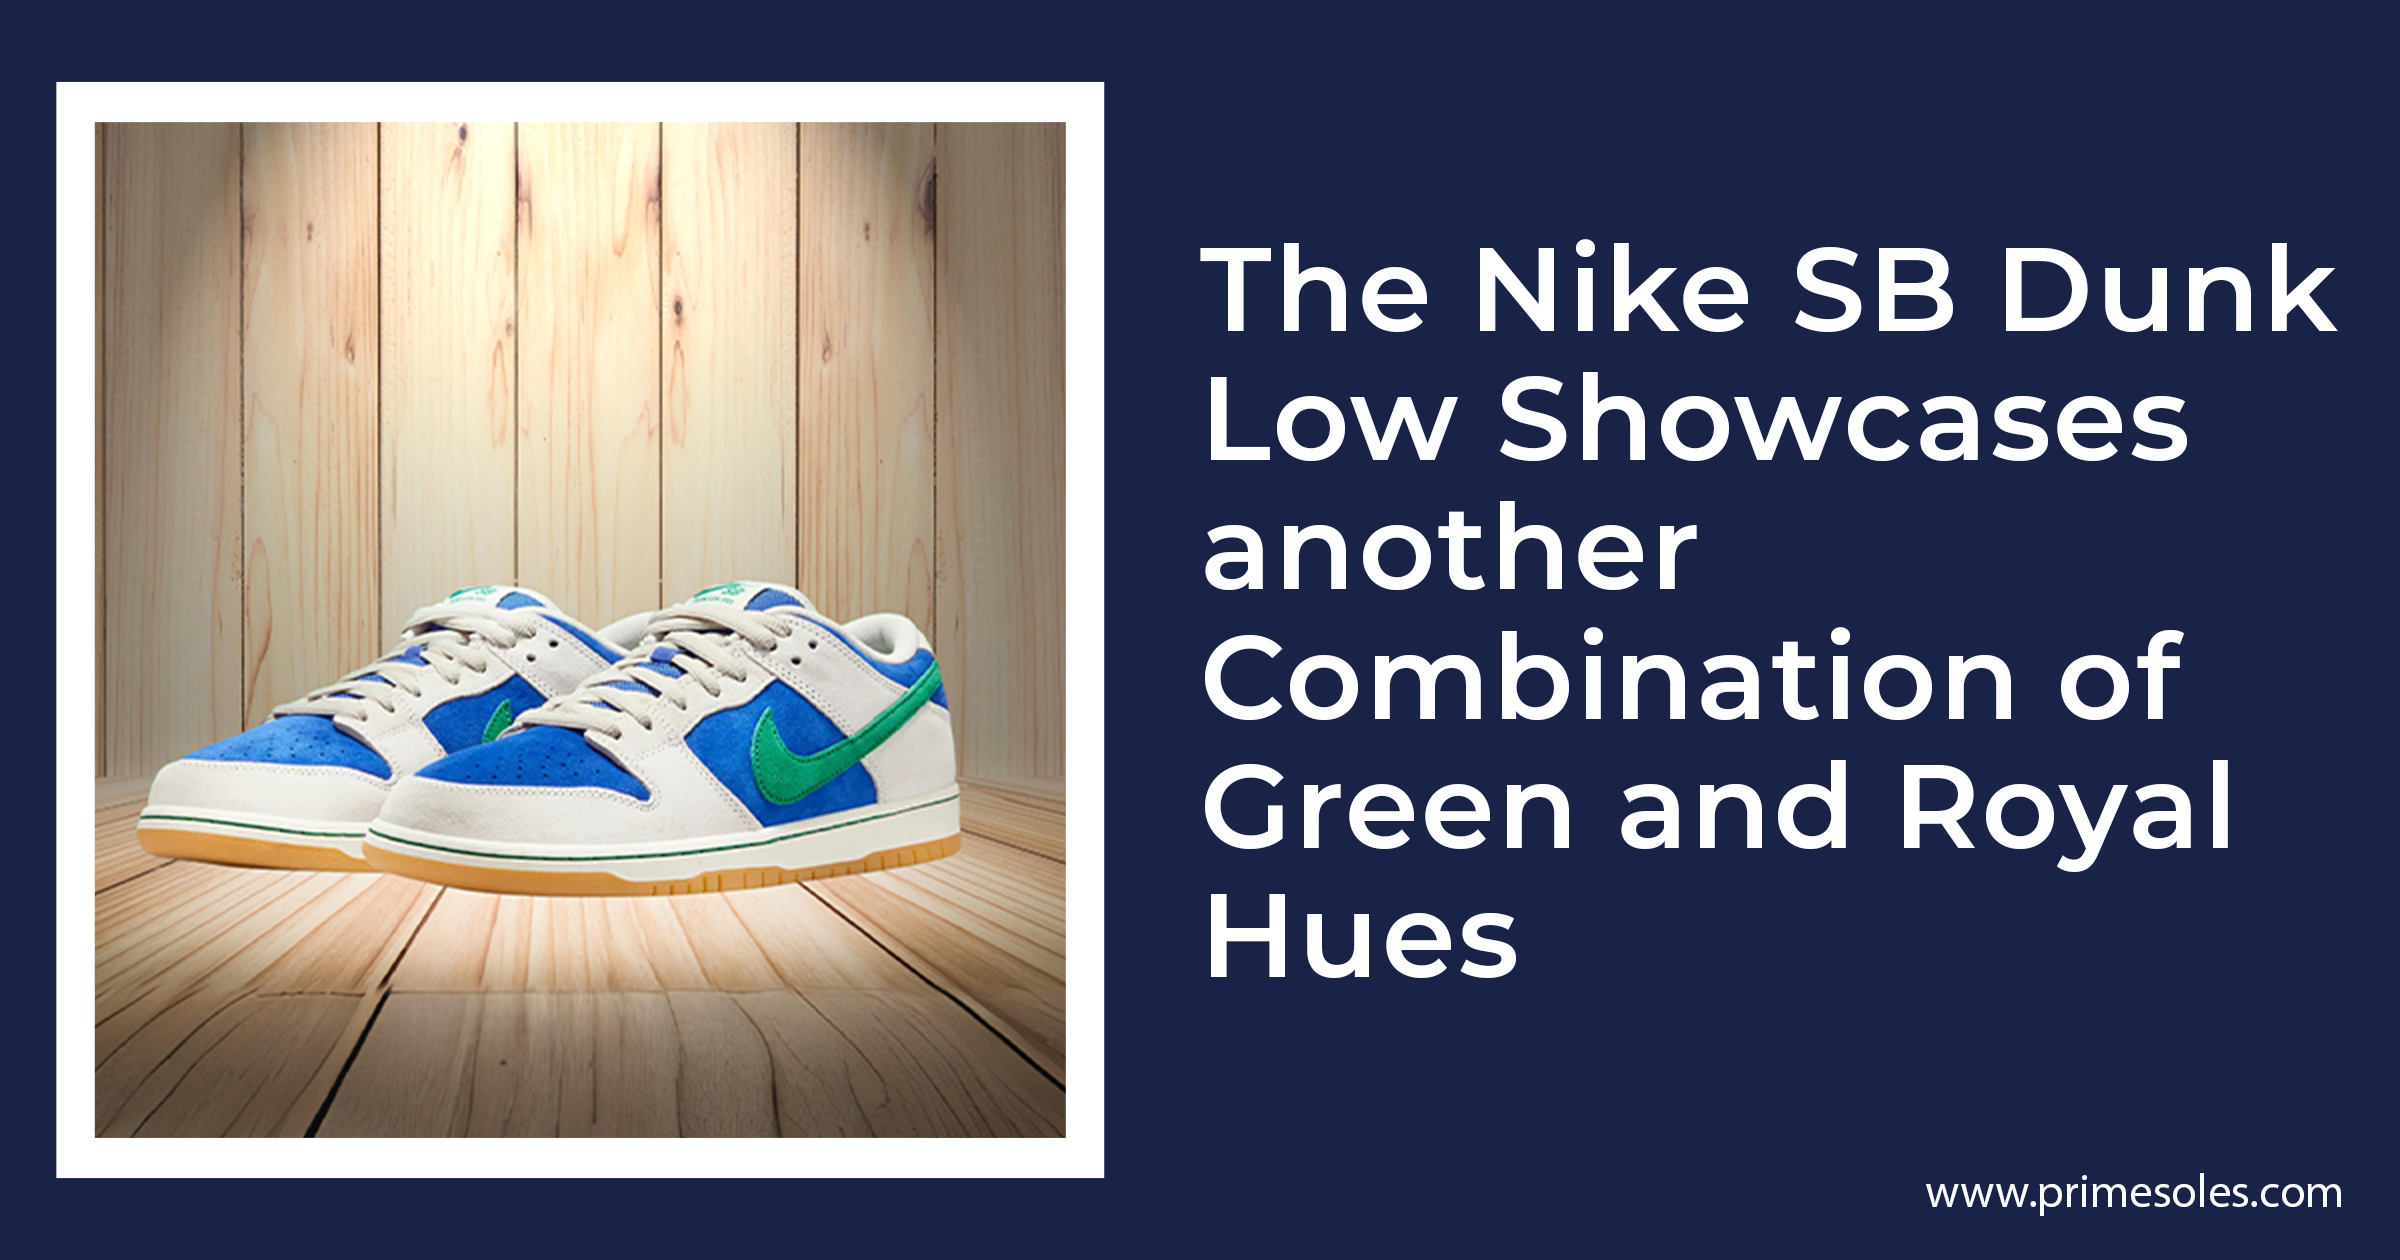 Nike SB Dunk Low Showcases another Combination of Green and Royal Hues